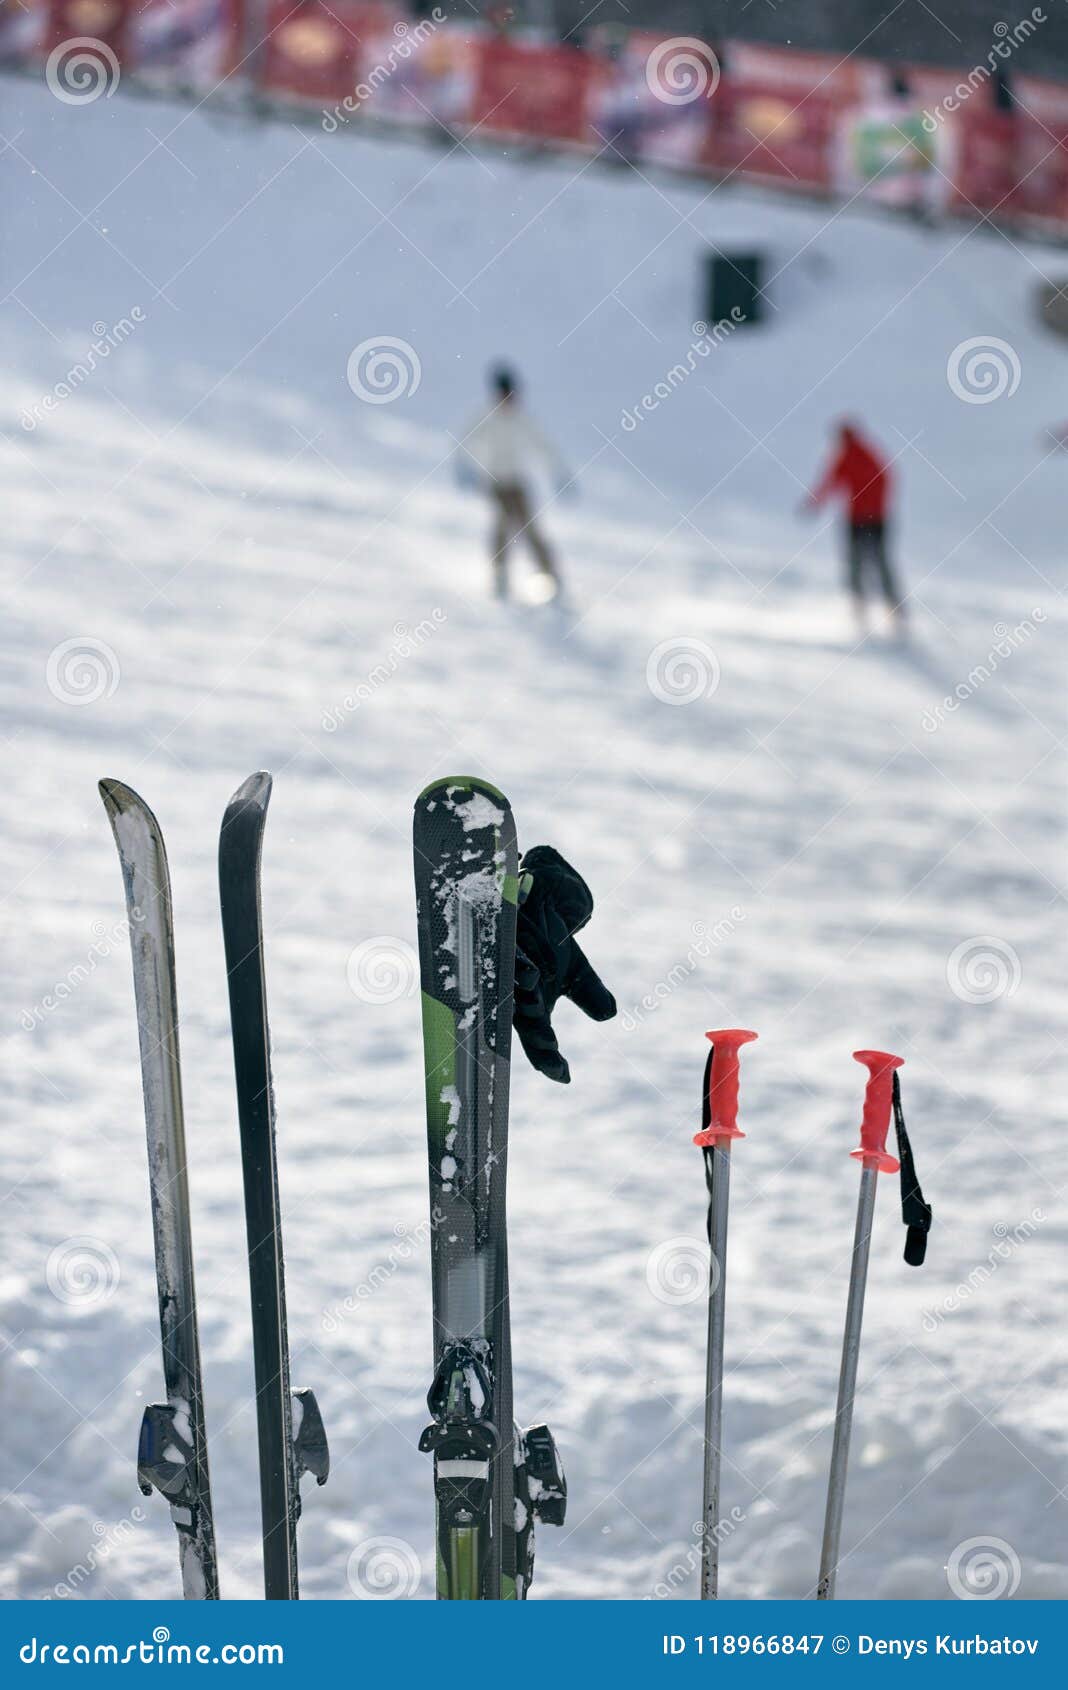 Set of Equipment for Skiing Stock Image - Image of outfit, cold: 118966847